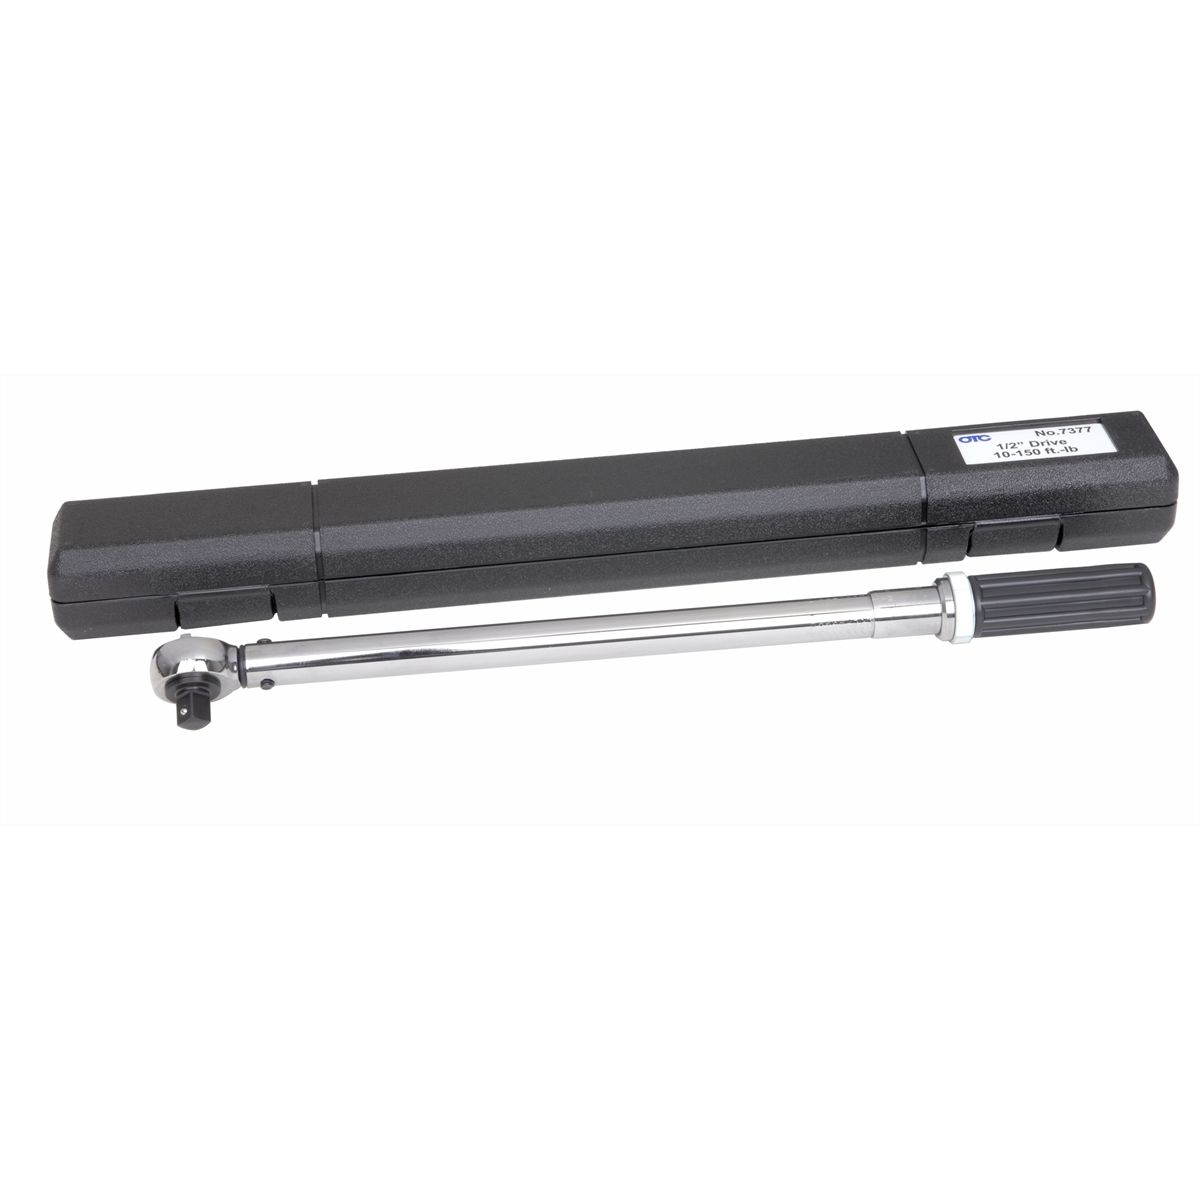 1/2 Inch Square Drive Accutorq Clikker Torque Wrench - 30-150 ft